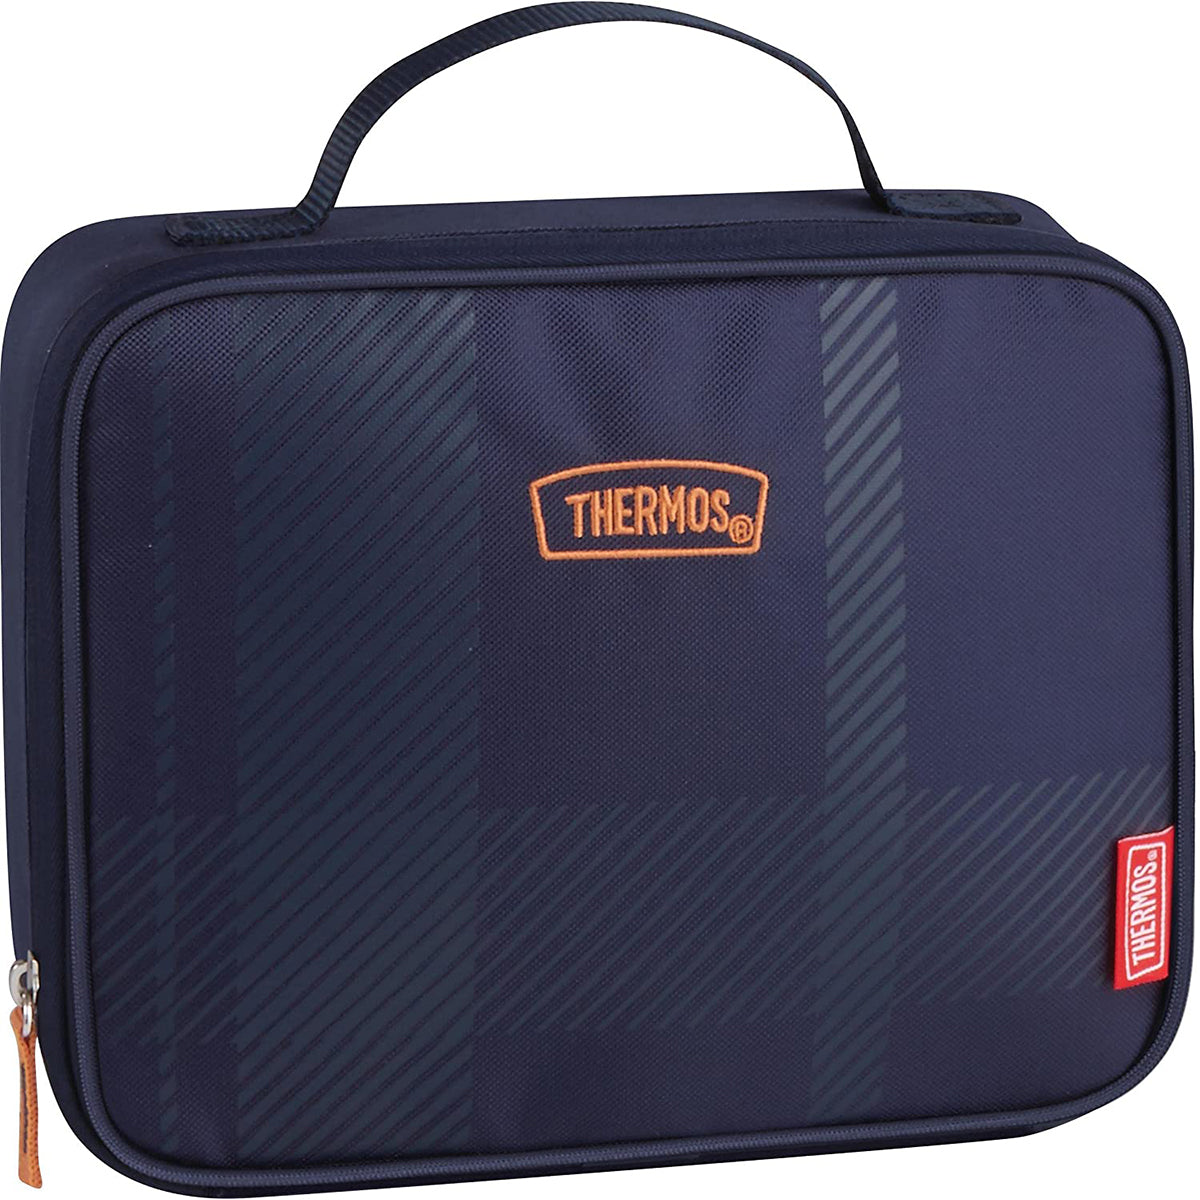 Thermos Standard Lunch Box - Navy Plaid Thermos